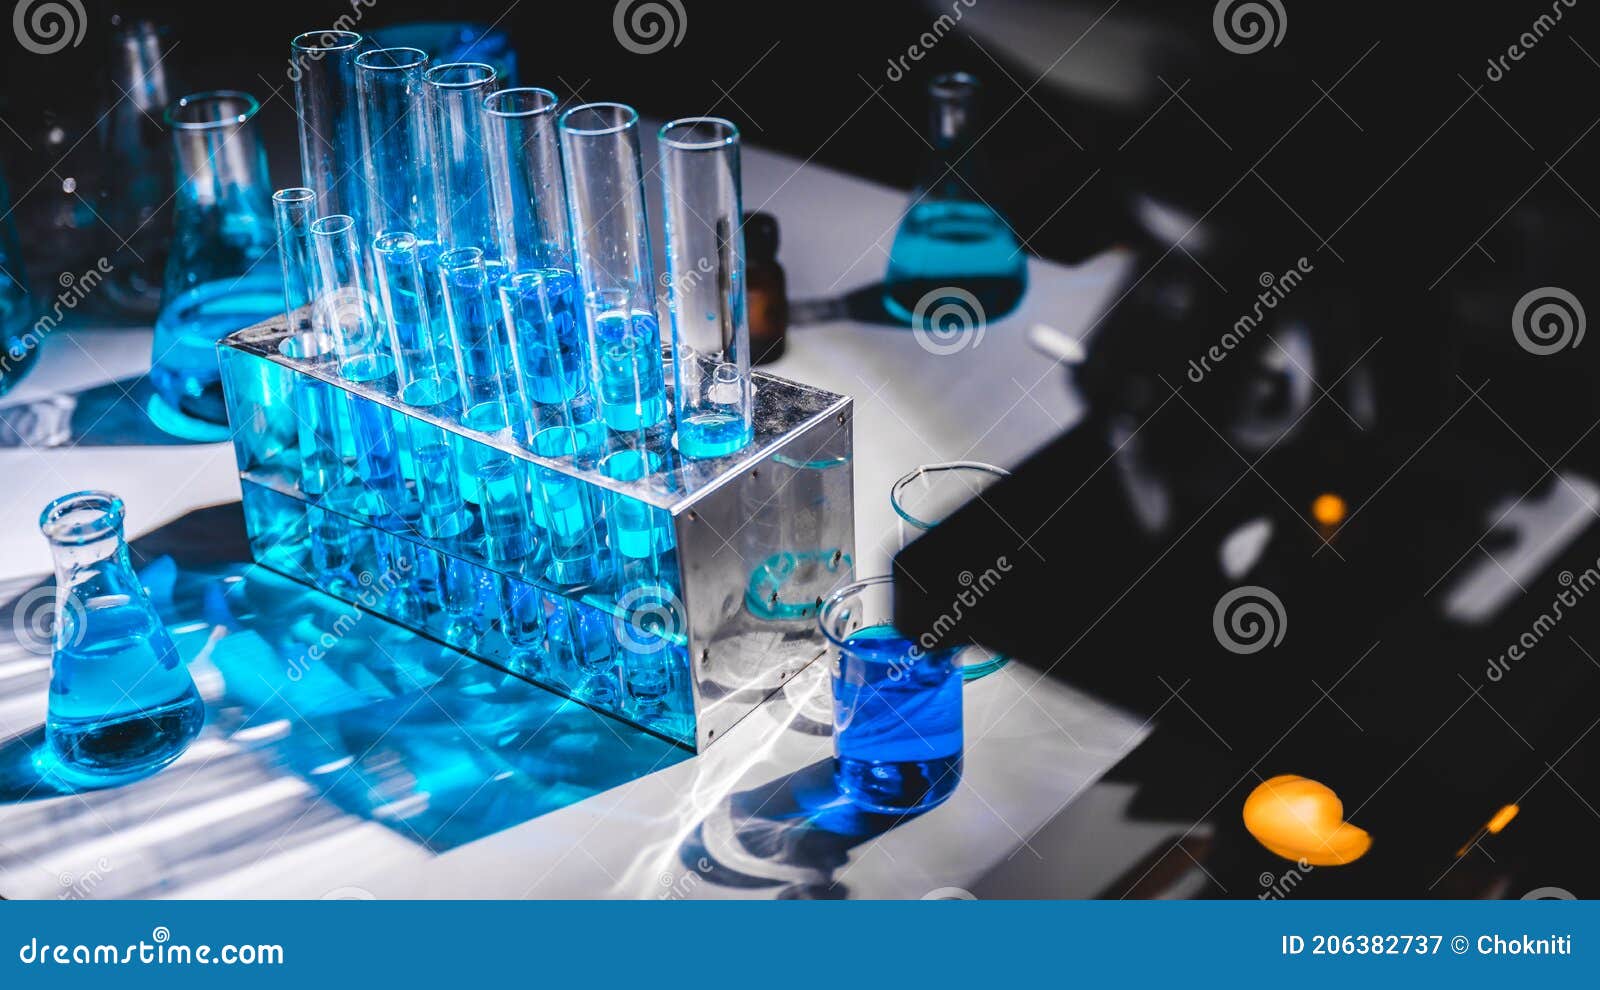 health care researchers working in medicals science technology research in laboratory, medical research lab or science laboratory